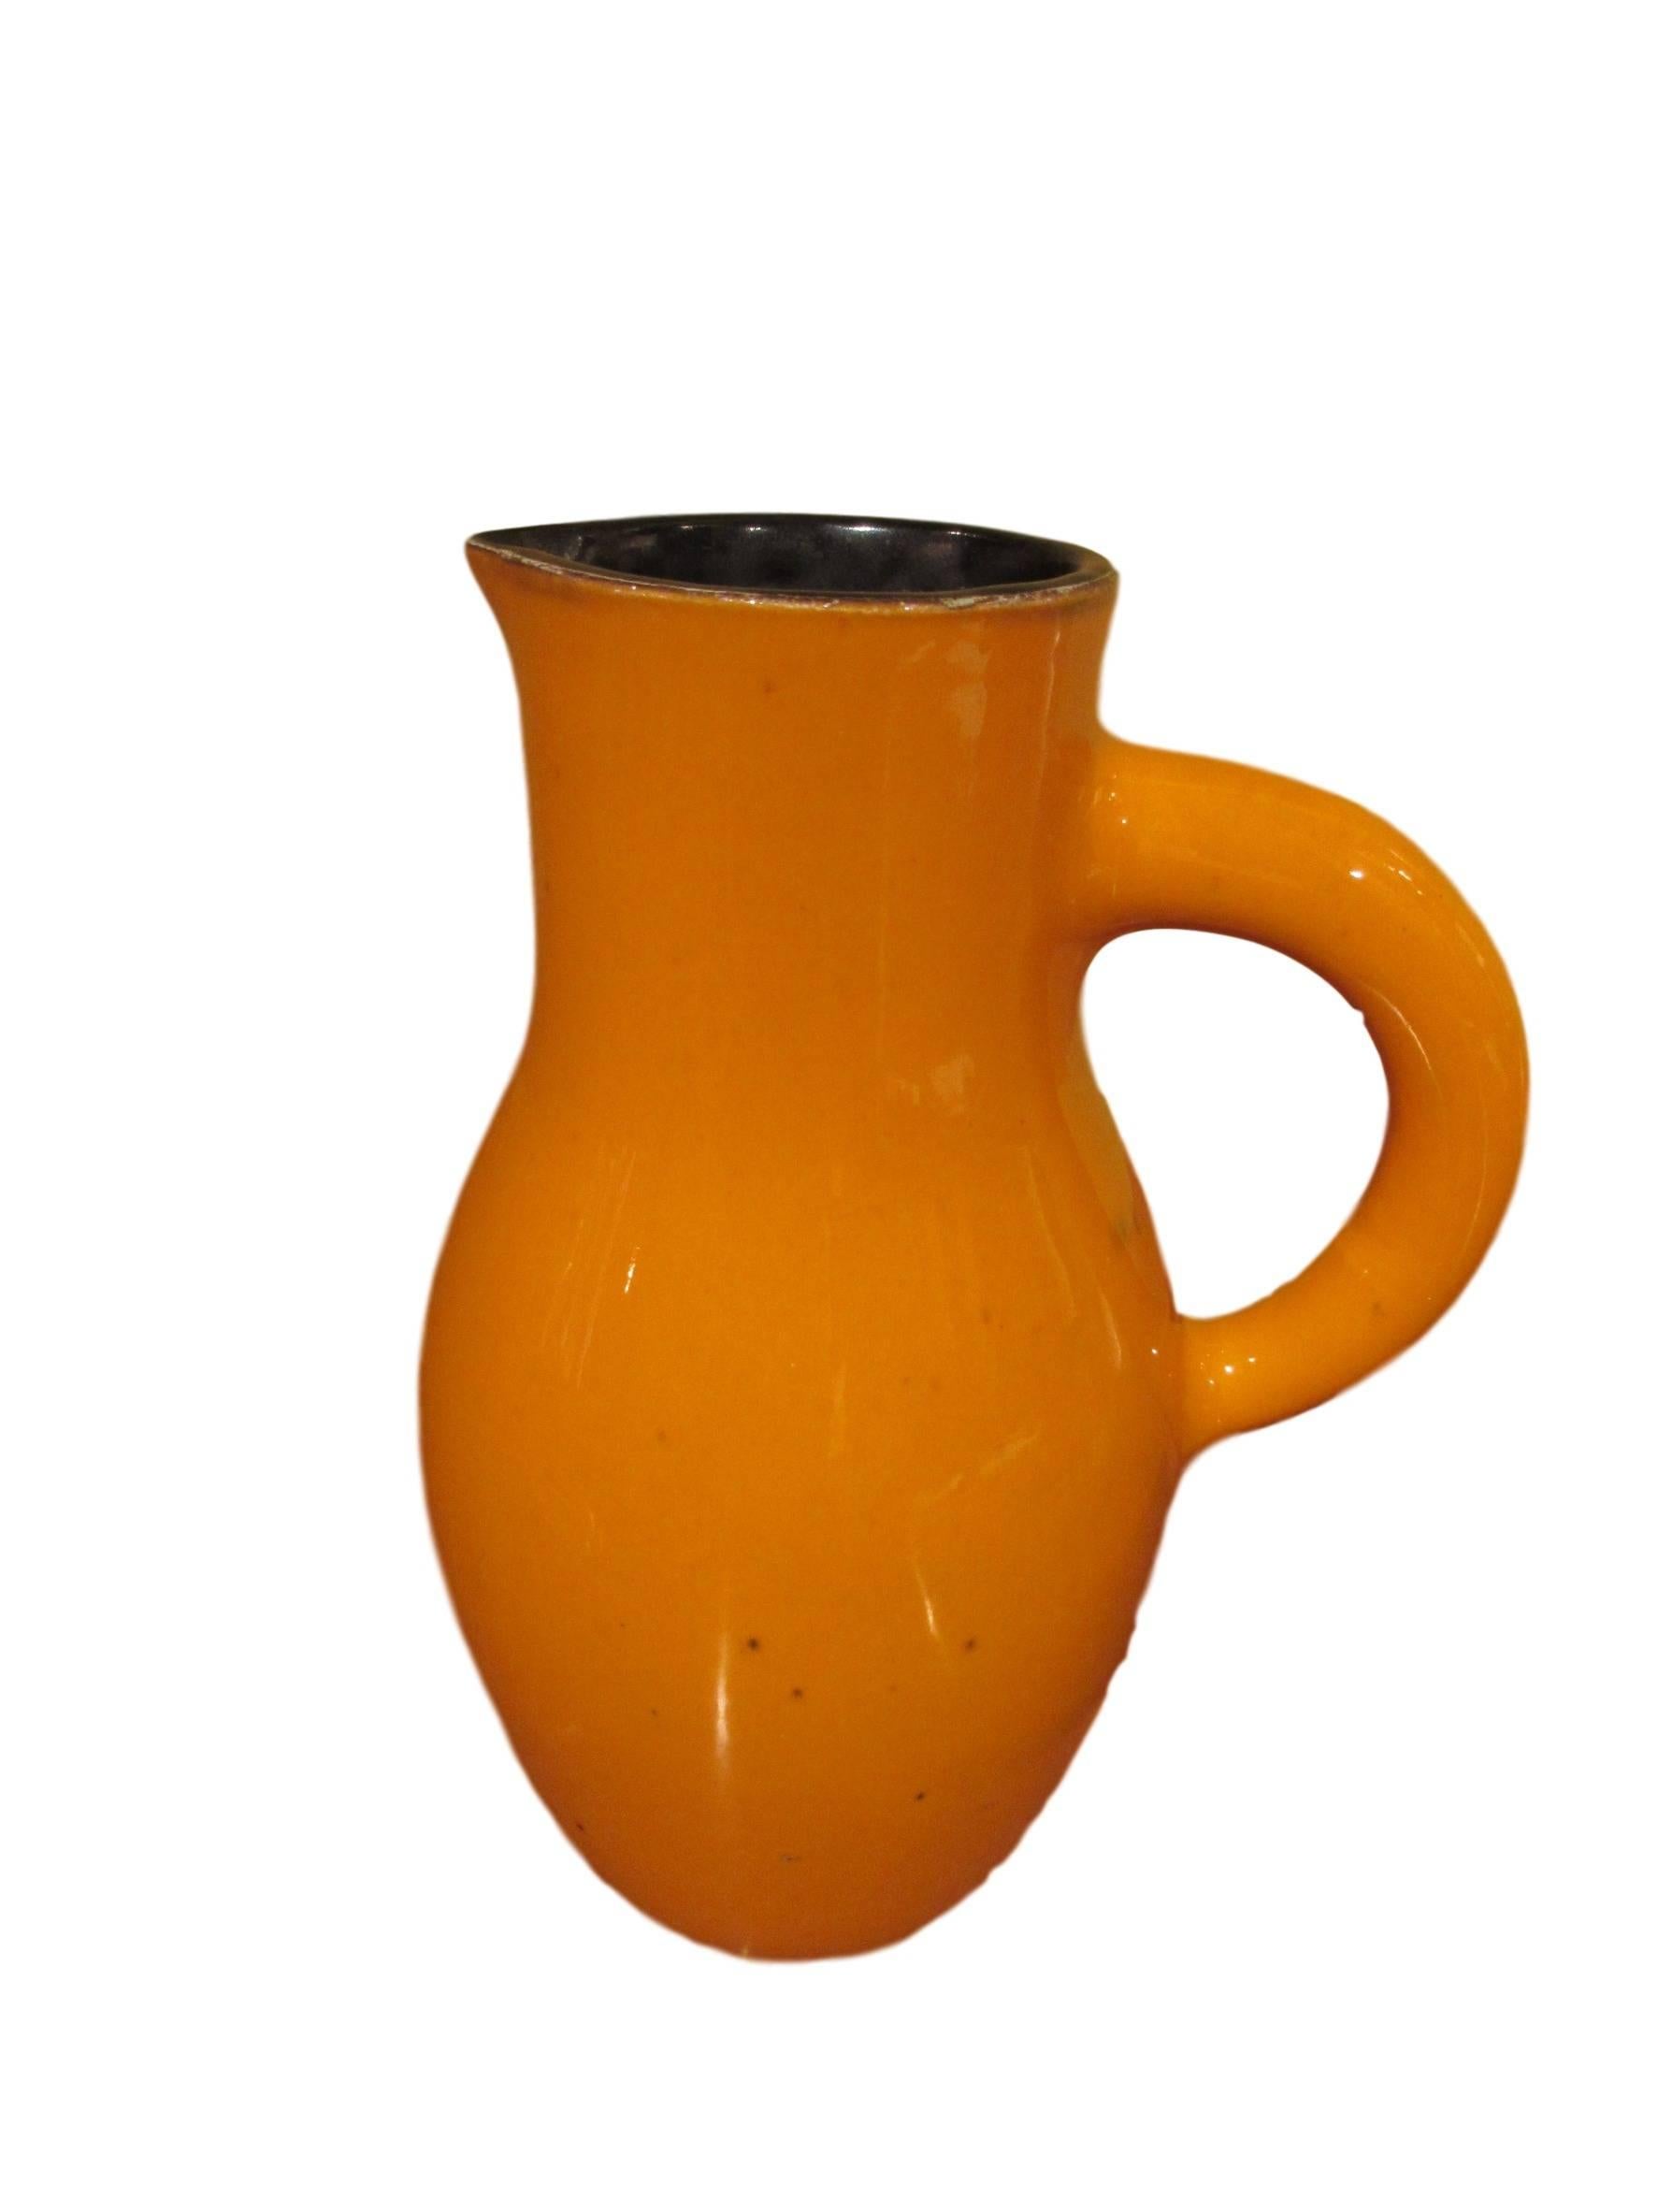 Ceramic carafe by Georges Jouve, signed.

Georges Jouve is an impotant ceramist of the 20th century. He was born in 1910 in Fontenay-sous-Bois and his parents were both decorators. At 17 years old, Jouve enrolled at the prestigious Ecole Boulle in